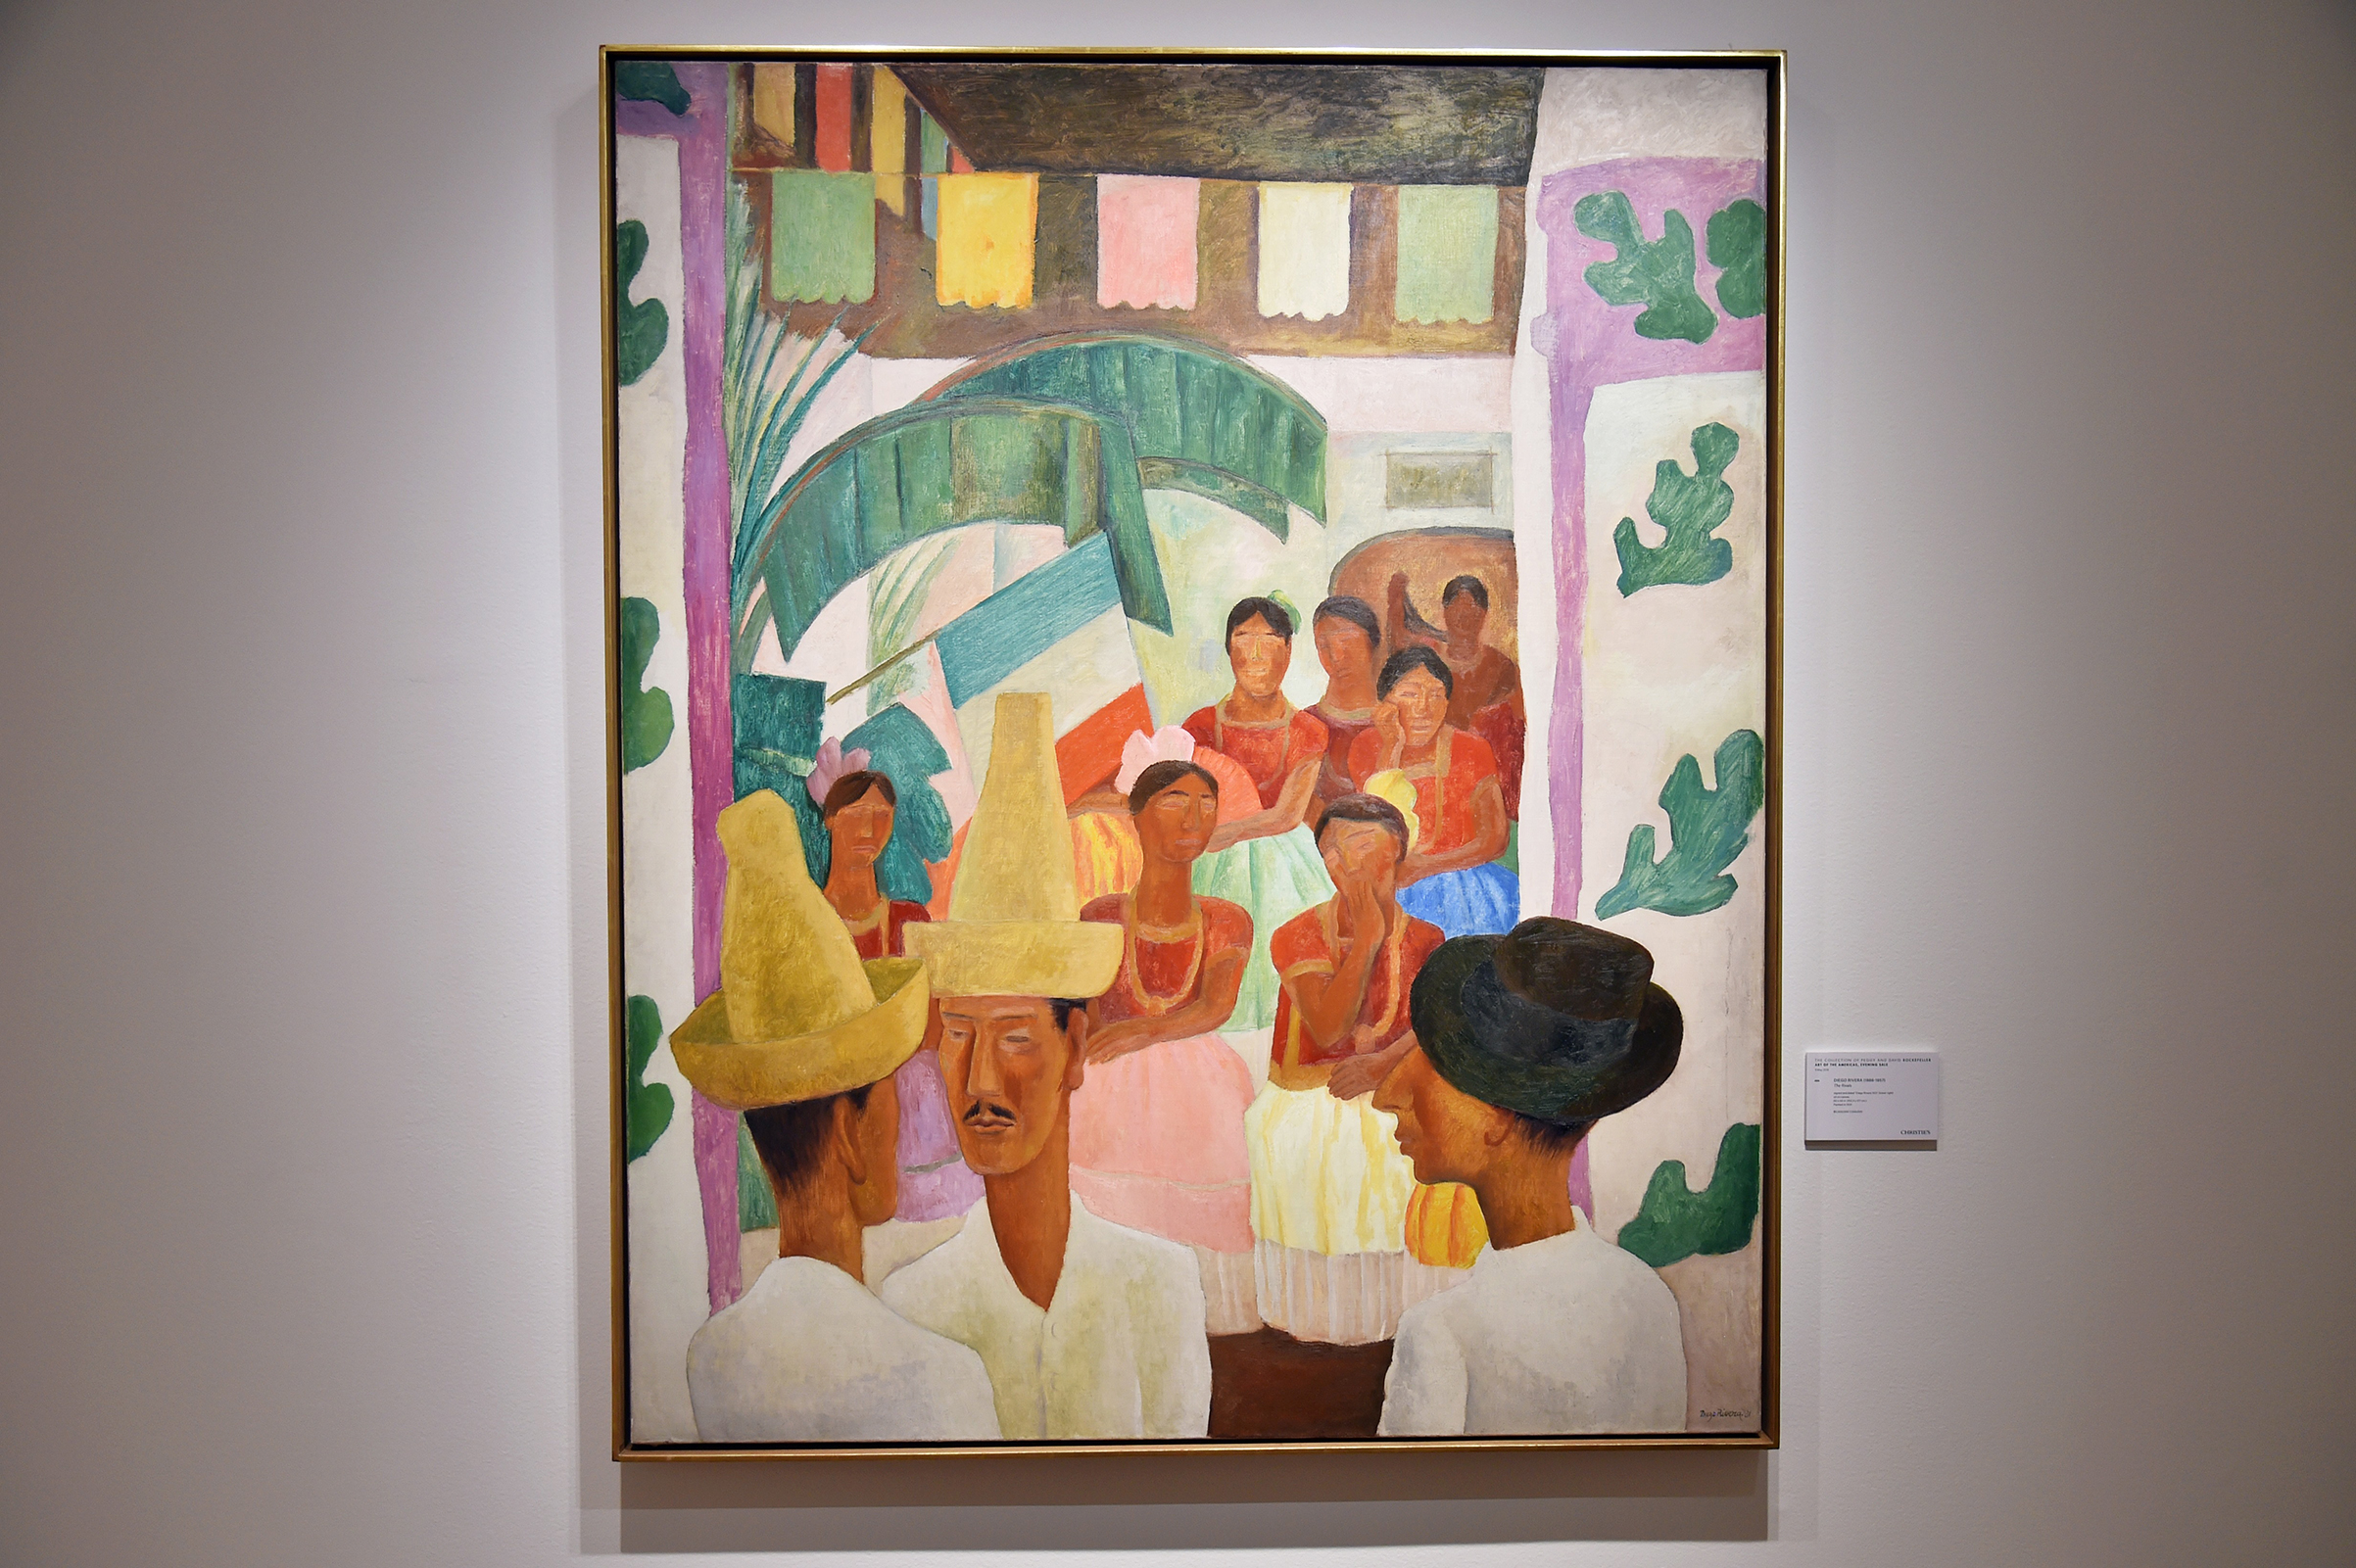 Los Rivales  (The Rivals) by Diego Rivera fetched $9.76 million on May 5, the highest price paid at auction for a Latin American artwork. The previous record-holder was Rivera's wife, Frida Kahlo.